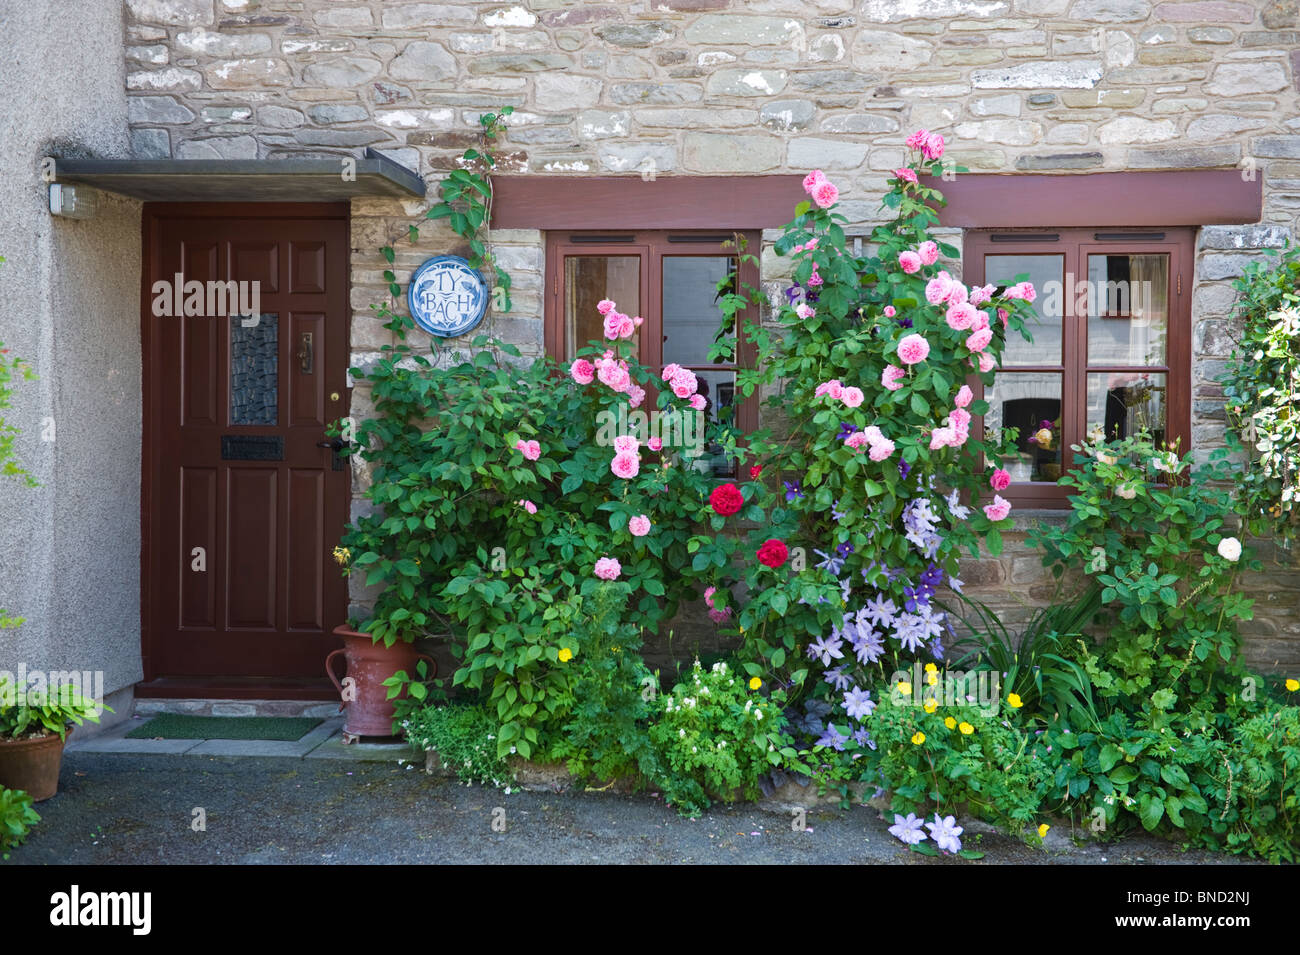 Picturesque cottage with climbing roses around the windows in Hay-on-Wye Powys Wales UK Stock Photo